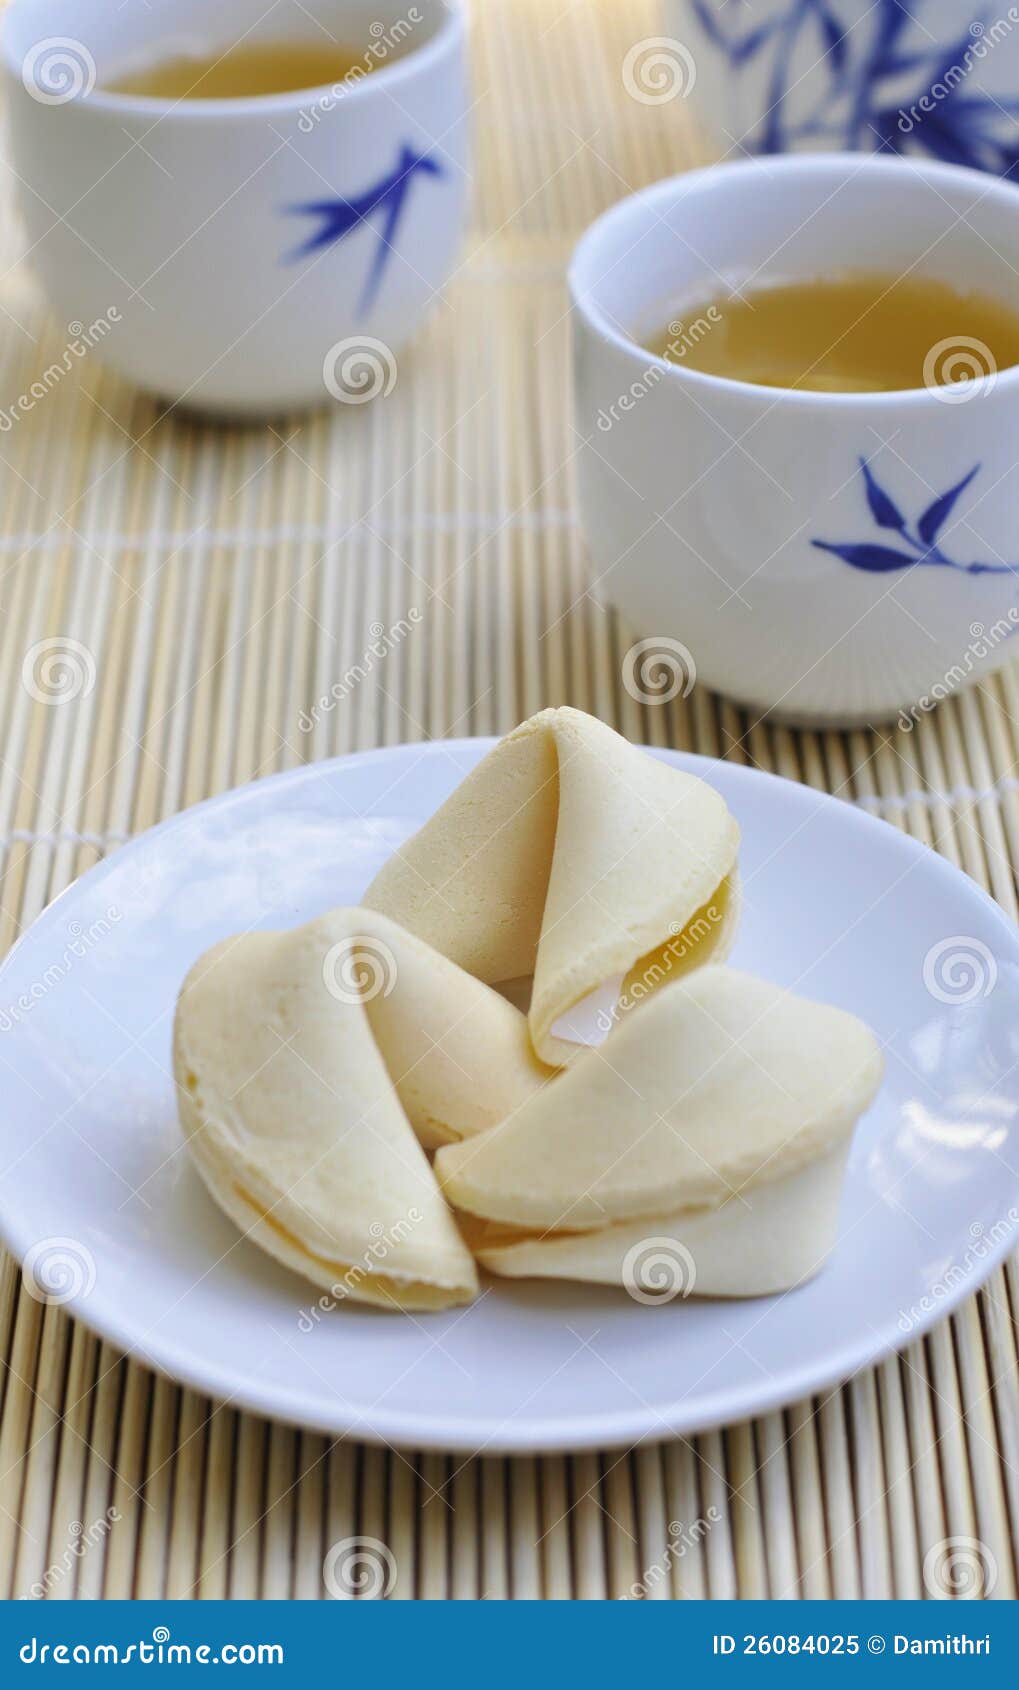 Fortune Cookies stock image. Image of fortune, asian - 26084025